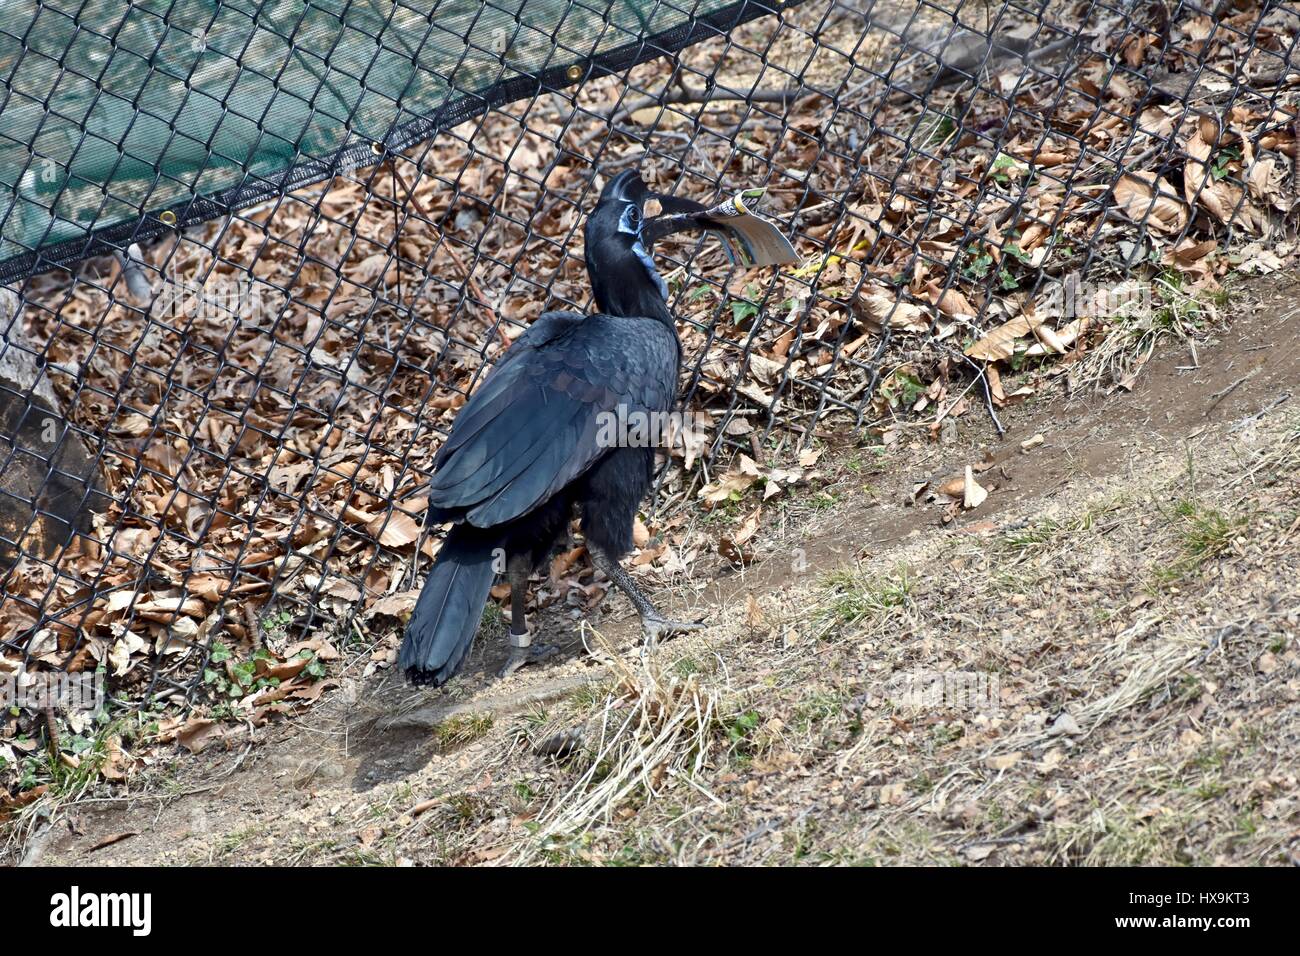 Baltimore, USA. 25th March 2017. A Northern Ground Hornbill (Bucorvus abyssinicus) carries around a zoo map after a park visitor drops a map in the exhibit. Photo Credit: Jeramey Lende/Alamy Live News Stock Photo